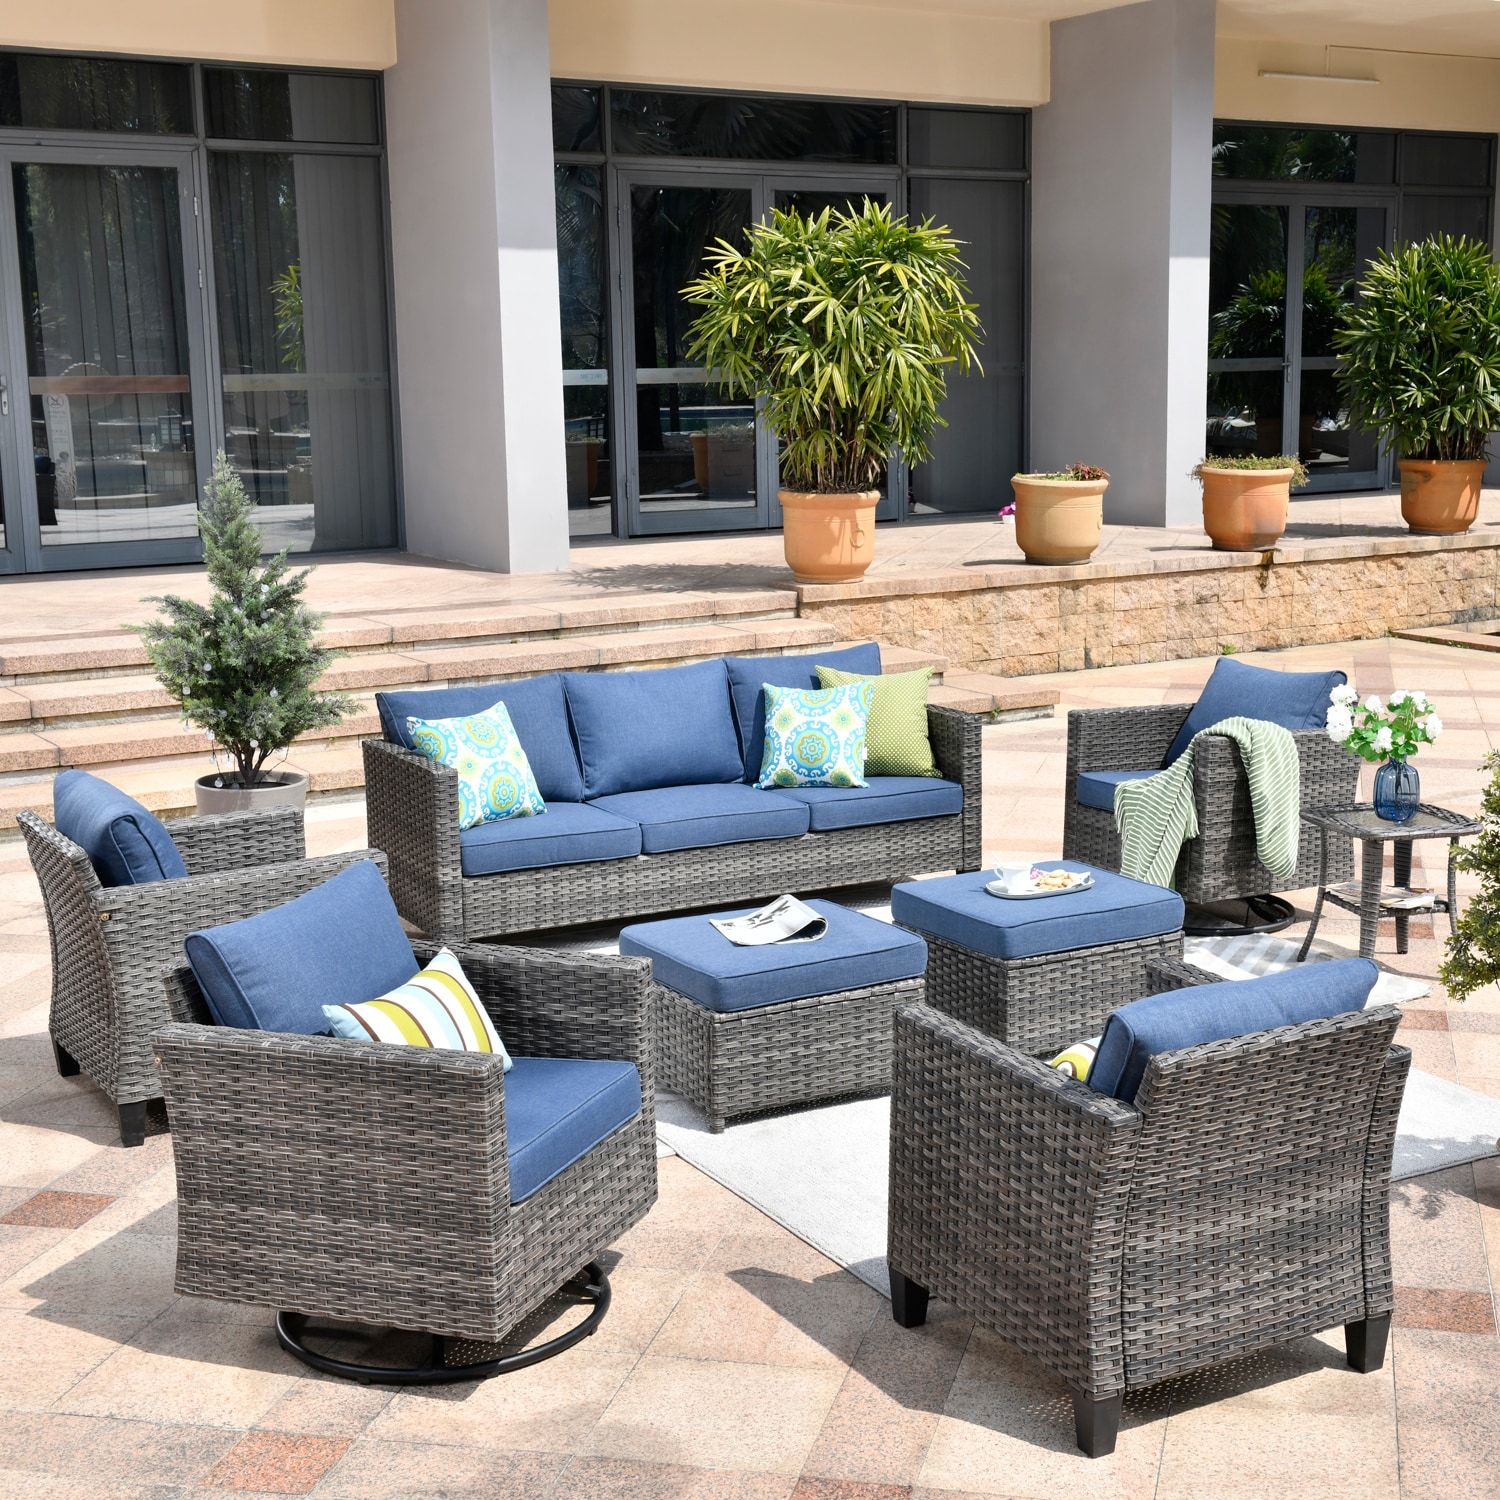 Xizzi Lullaby 8 Piece Rattan Patio Conversation Set With Blue Cushions In  The Patio Conversation Sets Department At Lowes Intended For 8 Pcs Outdoor Patio Furniture Set (View 8 of 15)